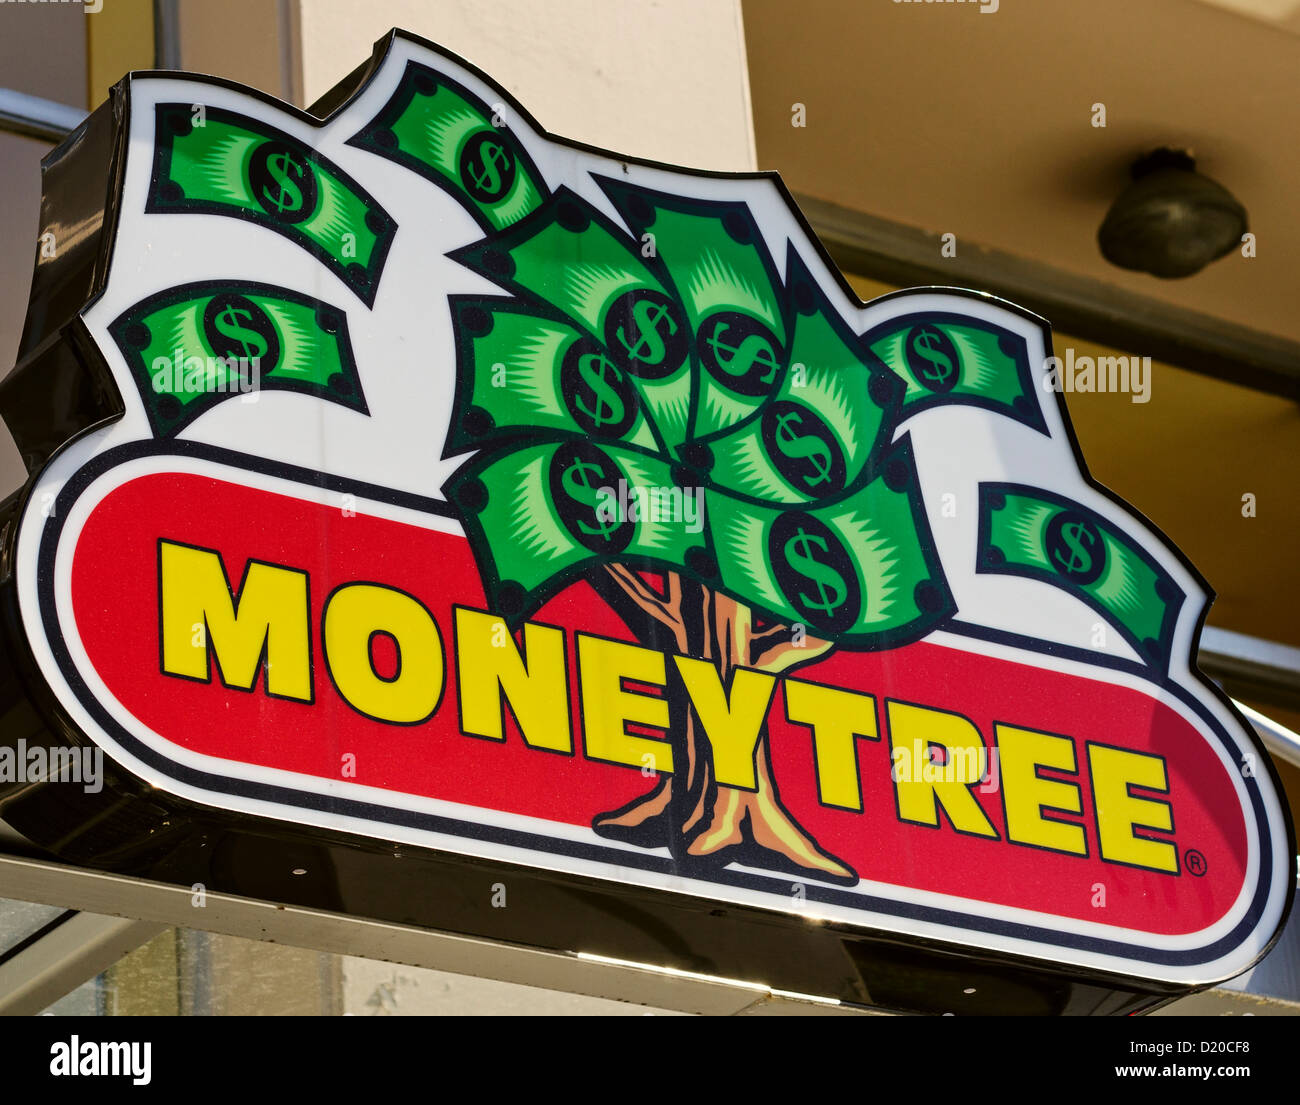 A Sign For Moneytree A Payday Loan And Check Cashing Service Stock Photo Alamy